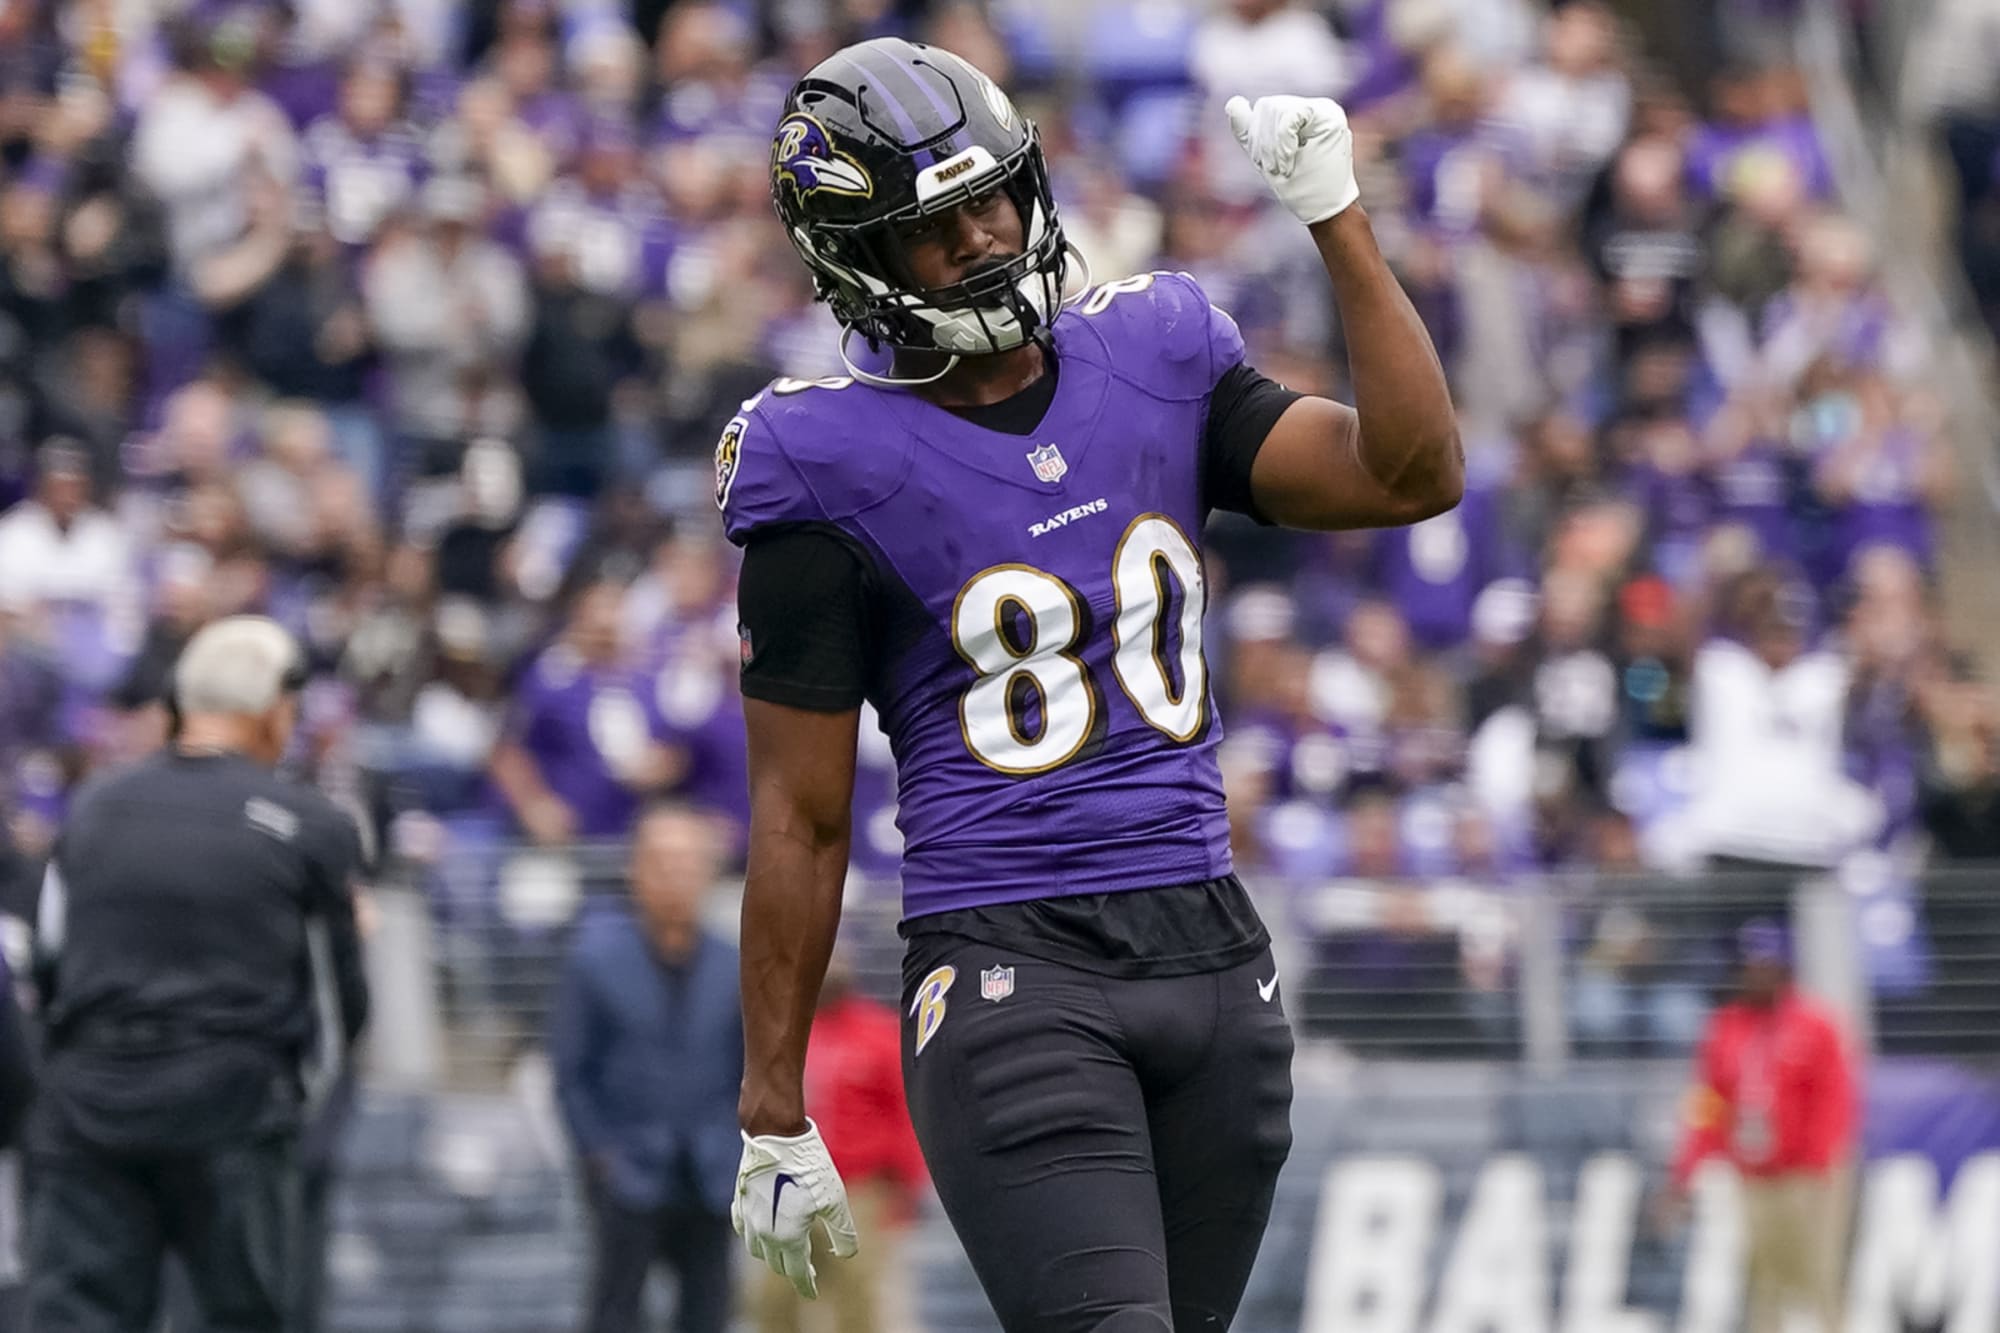 Isaiah Likely has earned a prominent role in the Ravens offense BVM